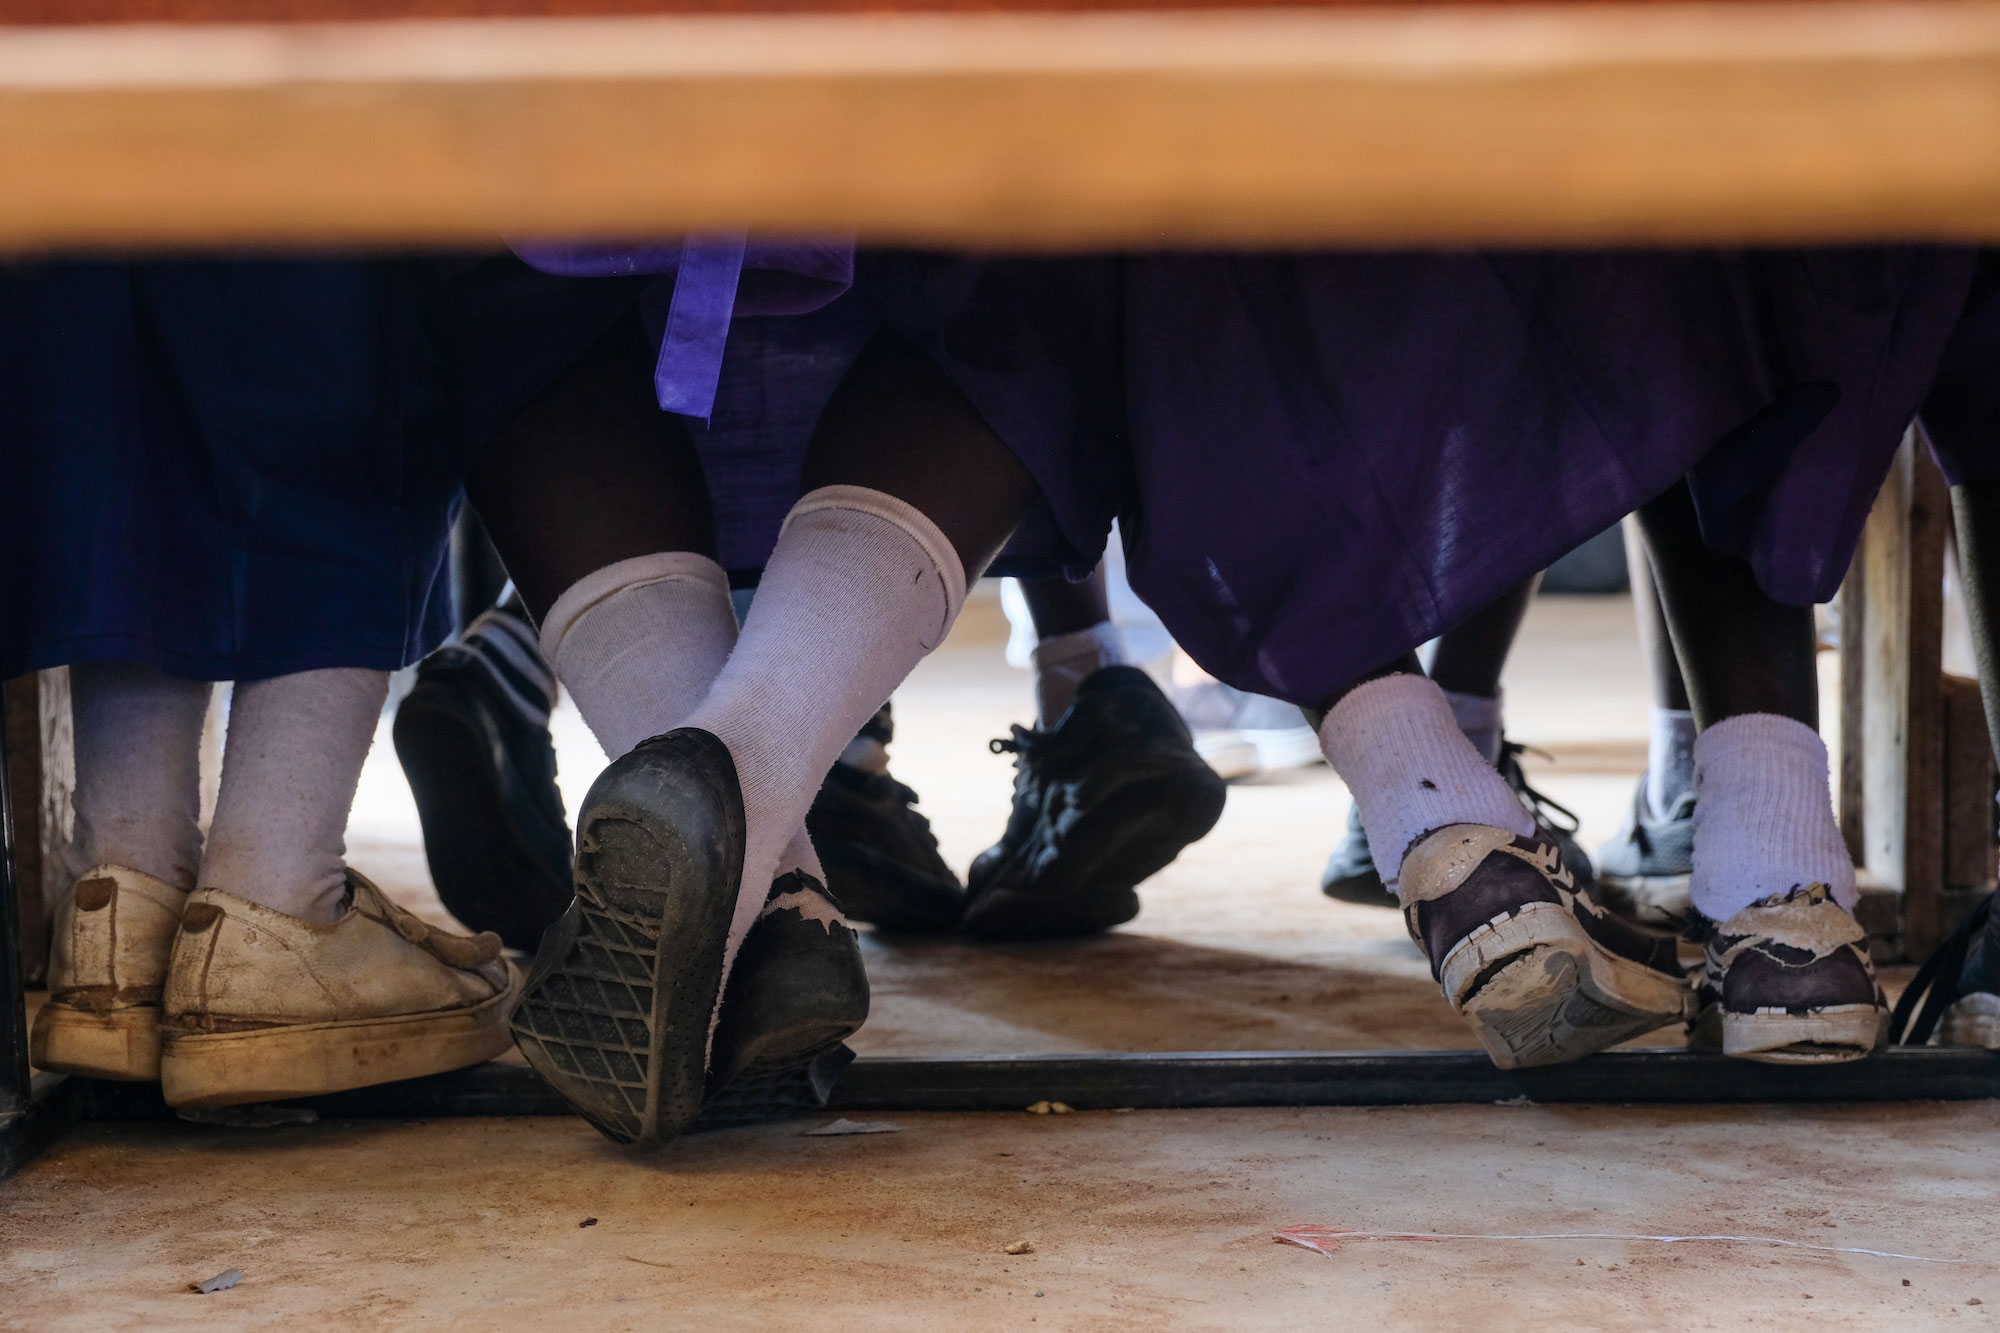 View of the feet of Tanzanian children in school